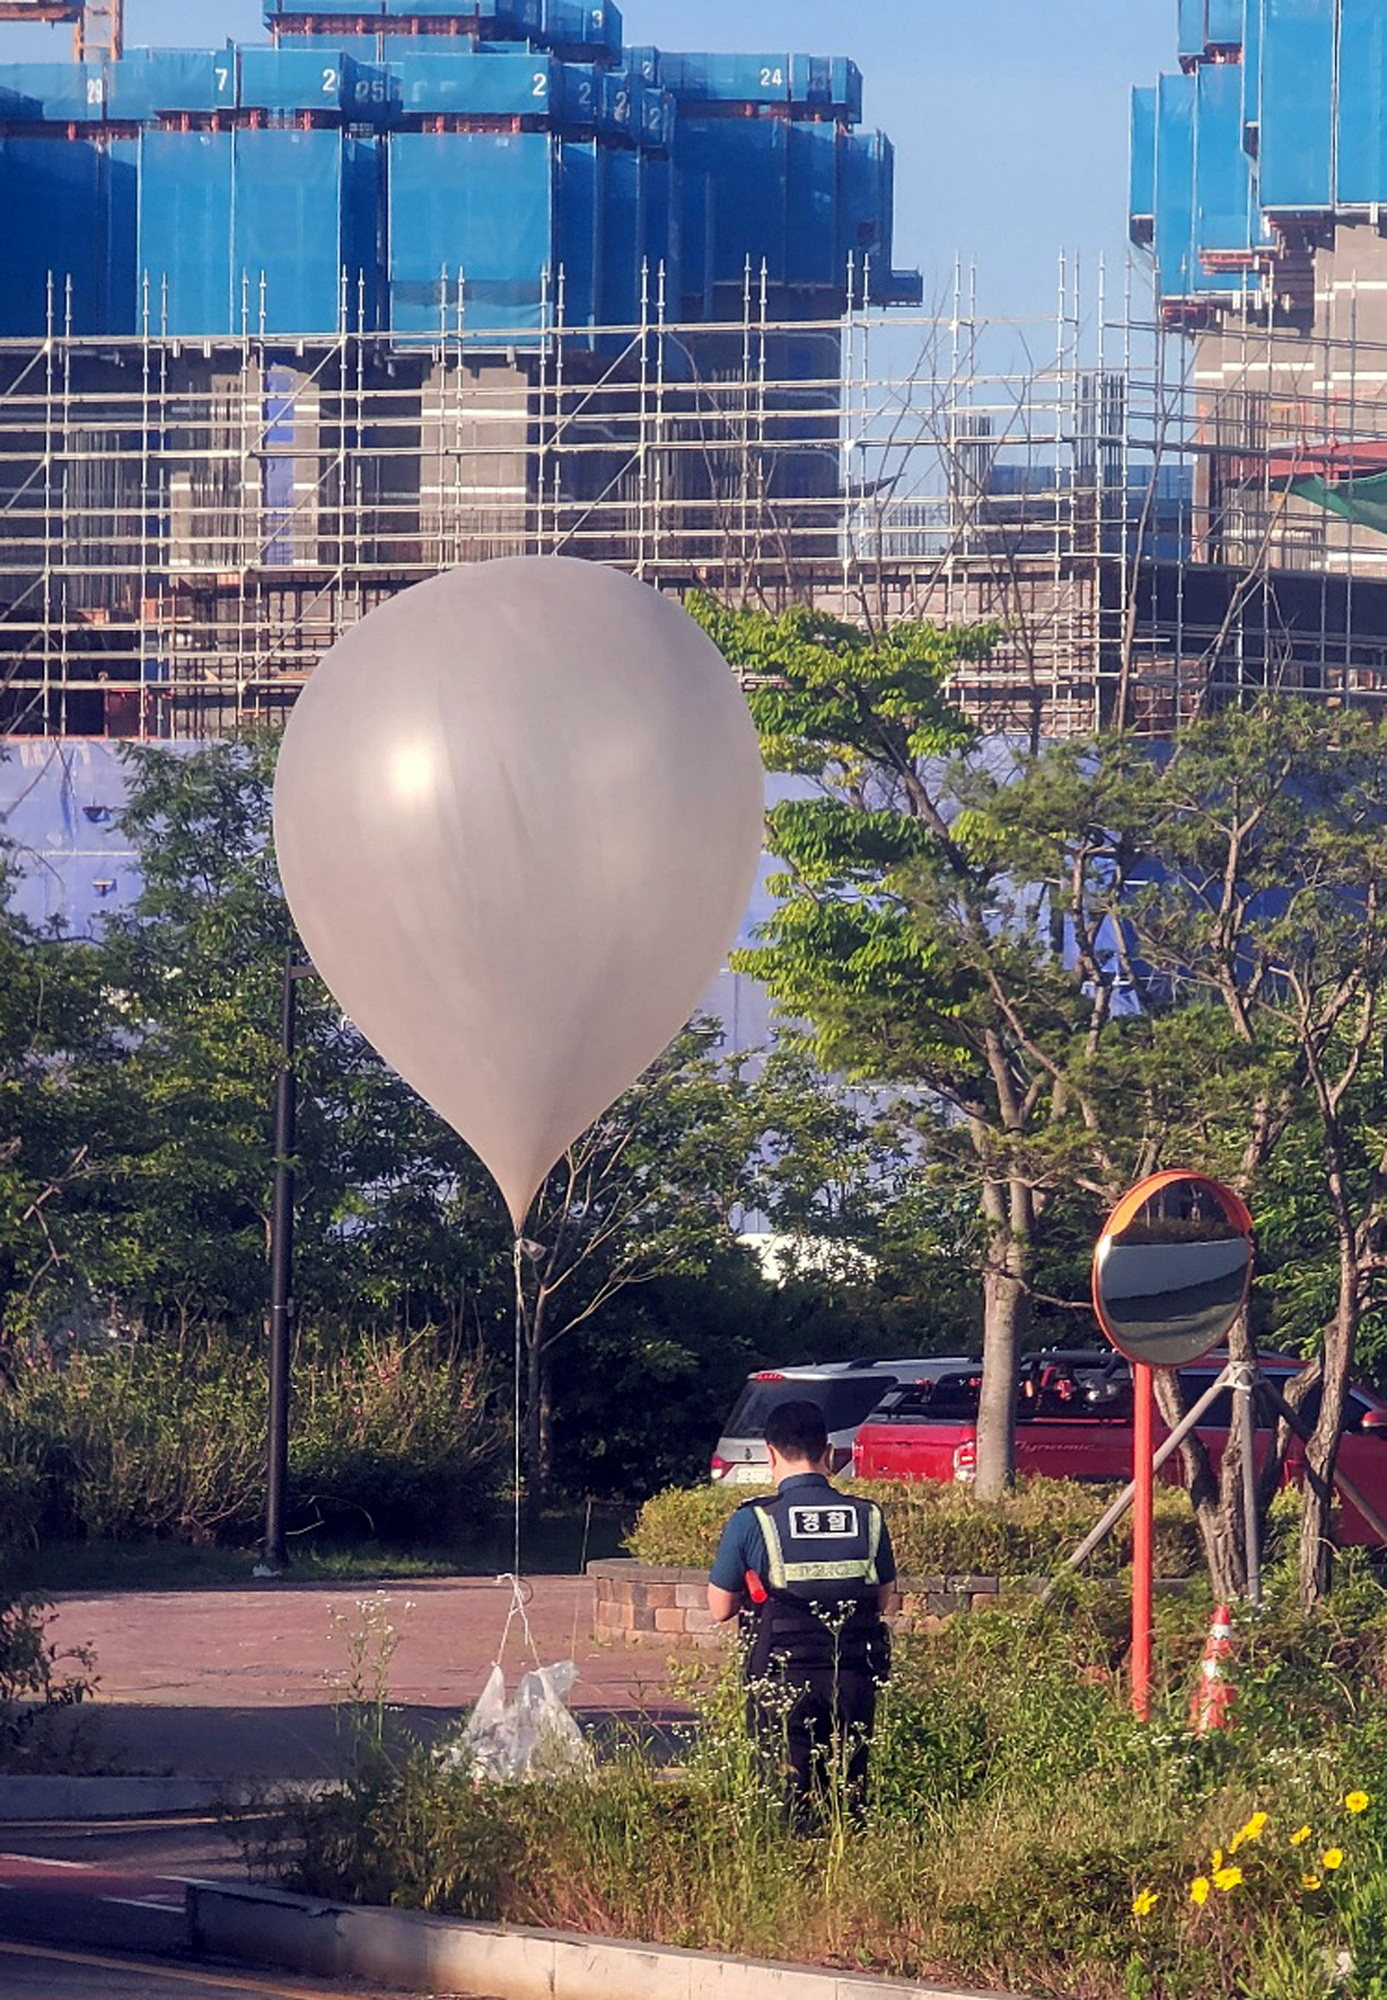 A balloon believed to have been sent by North Korea, carrying various objects including what appeared to be rubbish, is pictured at a park in Incheon, South Korea, on Sunday. Photo: Reuters